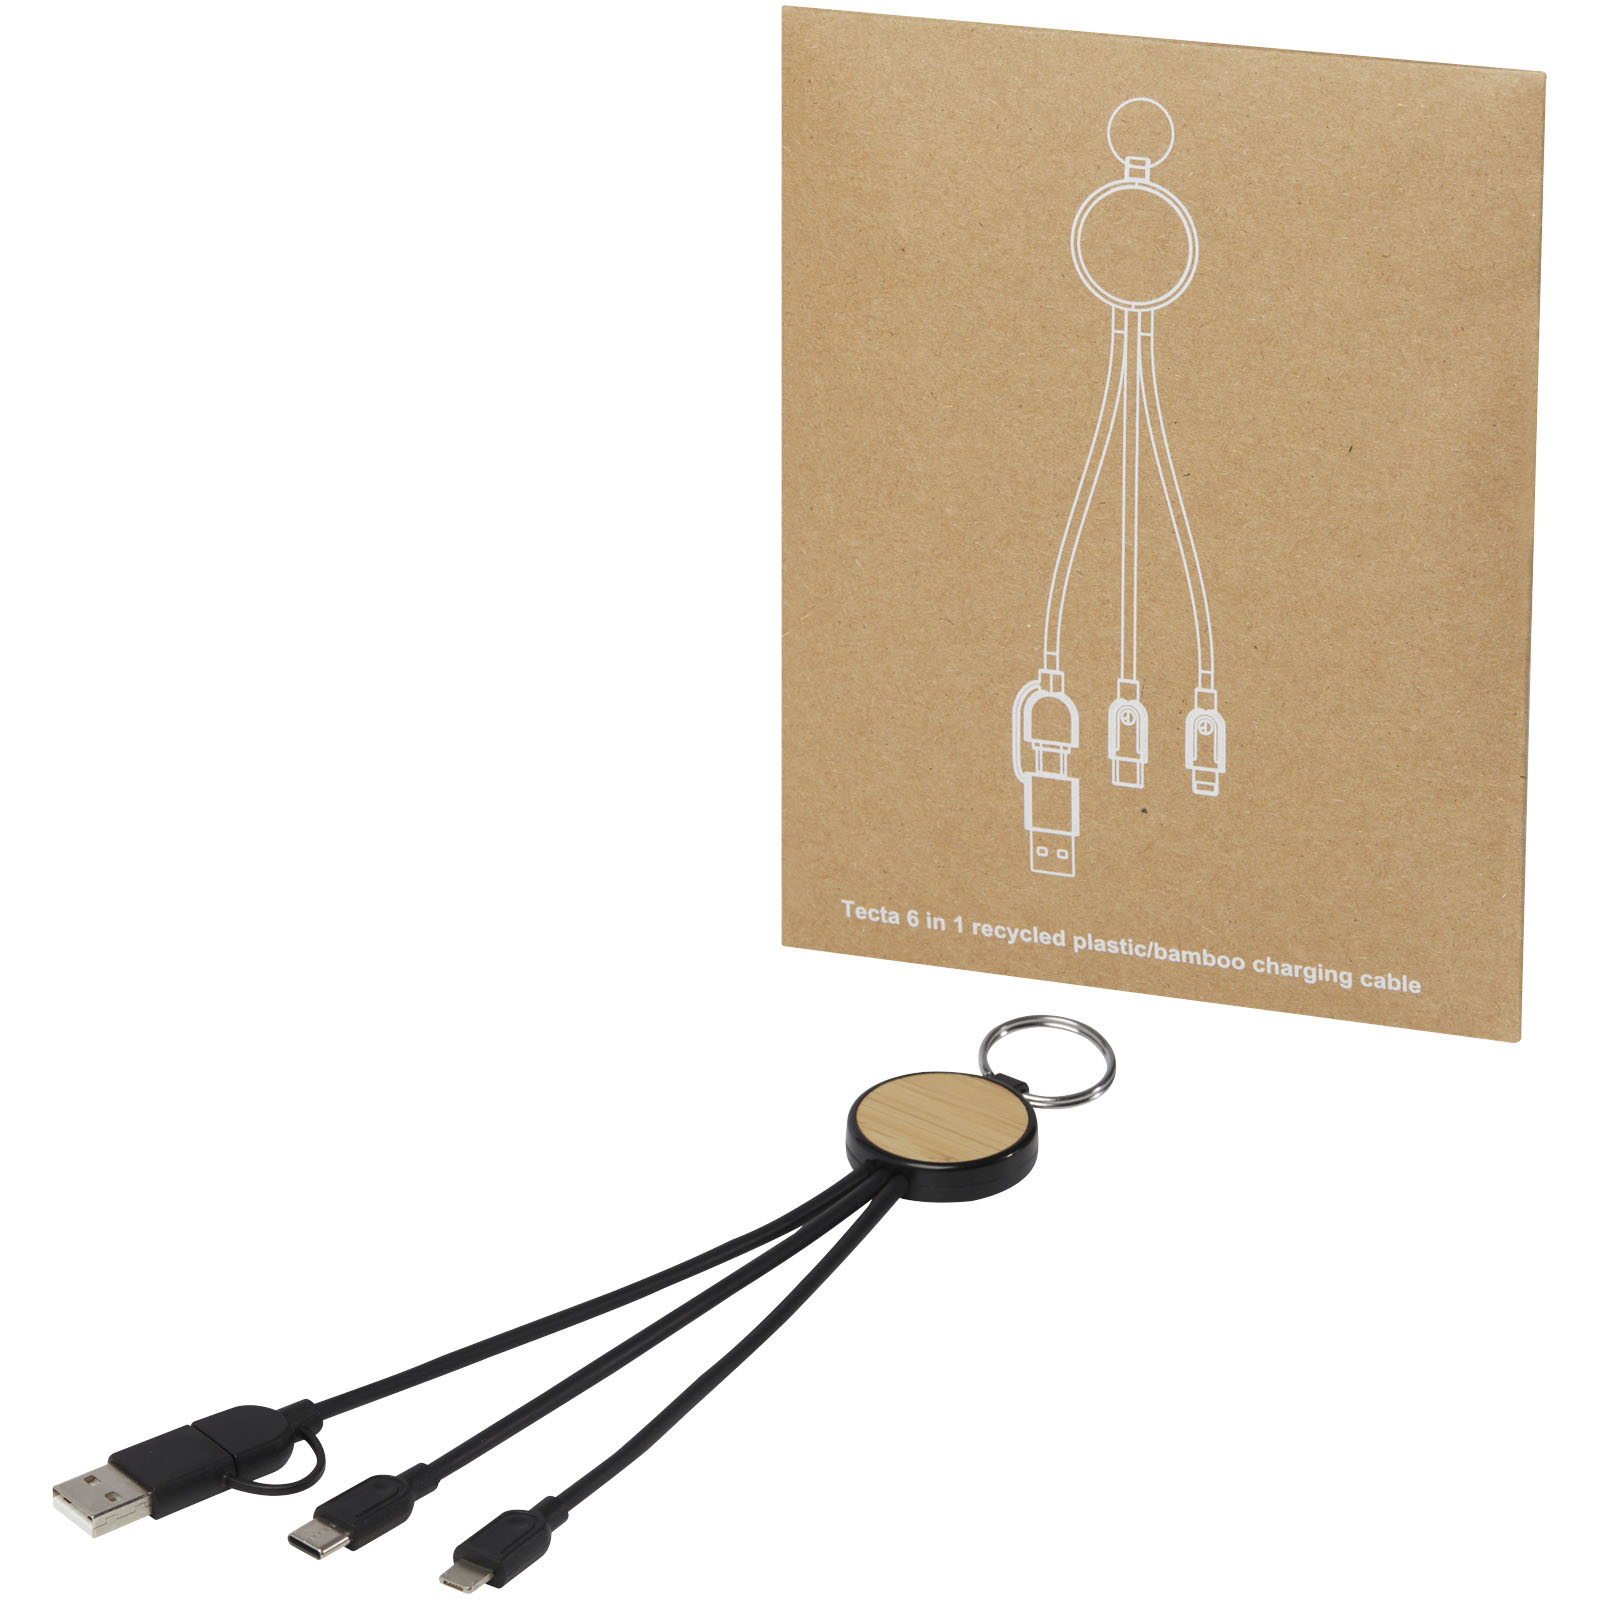 Advertising Cables - Tecta 6-in-1 recycled plastic/bamboo charging cable with keyring - 4